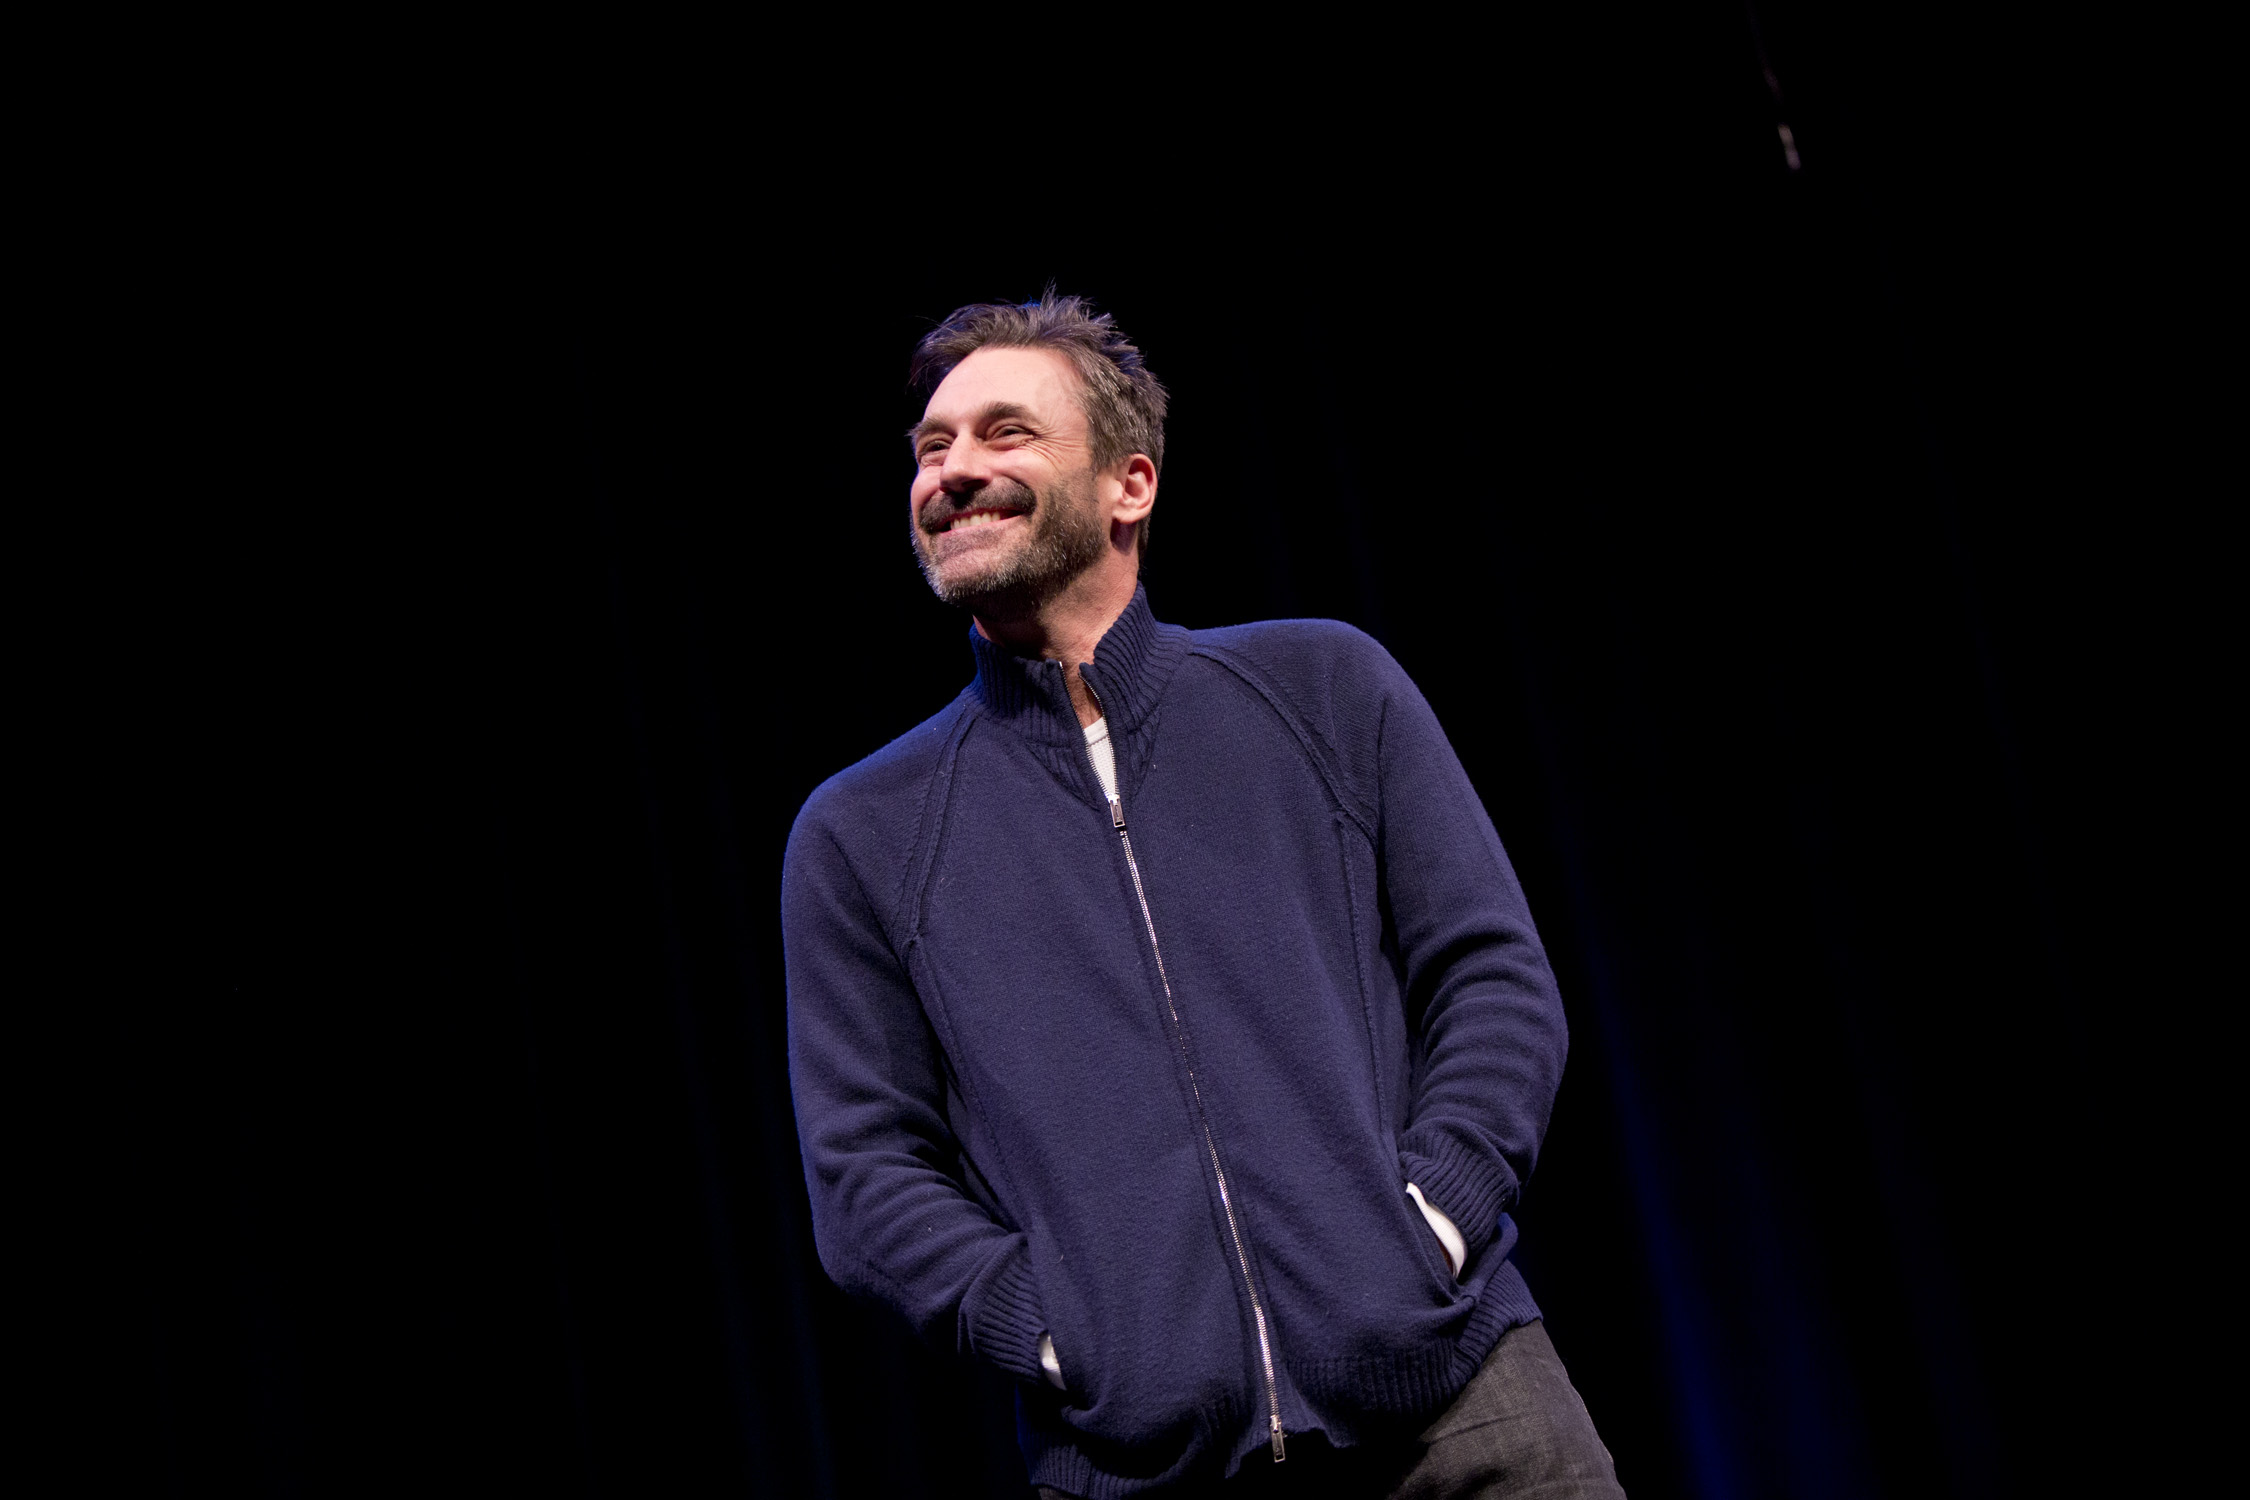 Jon Hamm at Theme Park Improv 2017 at SF Sketchfest. Photo by Tommy Lau.